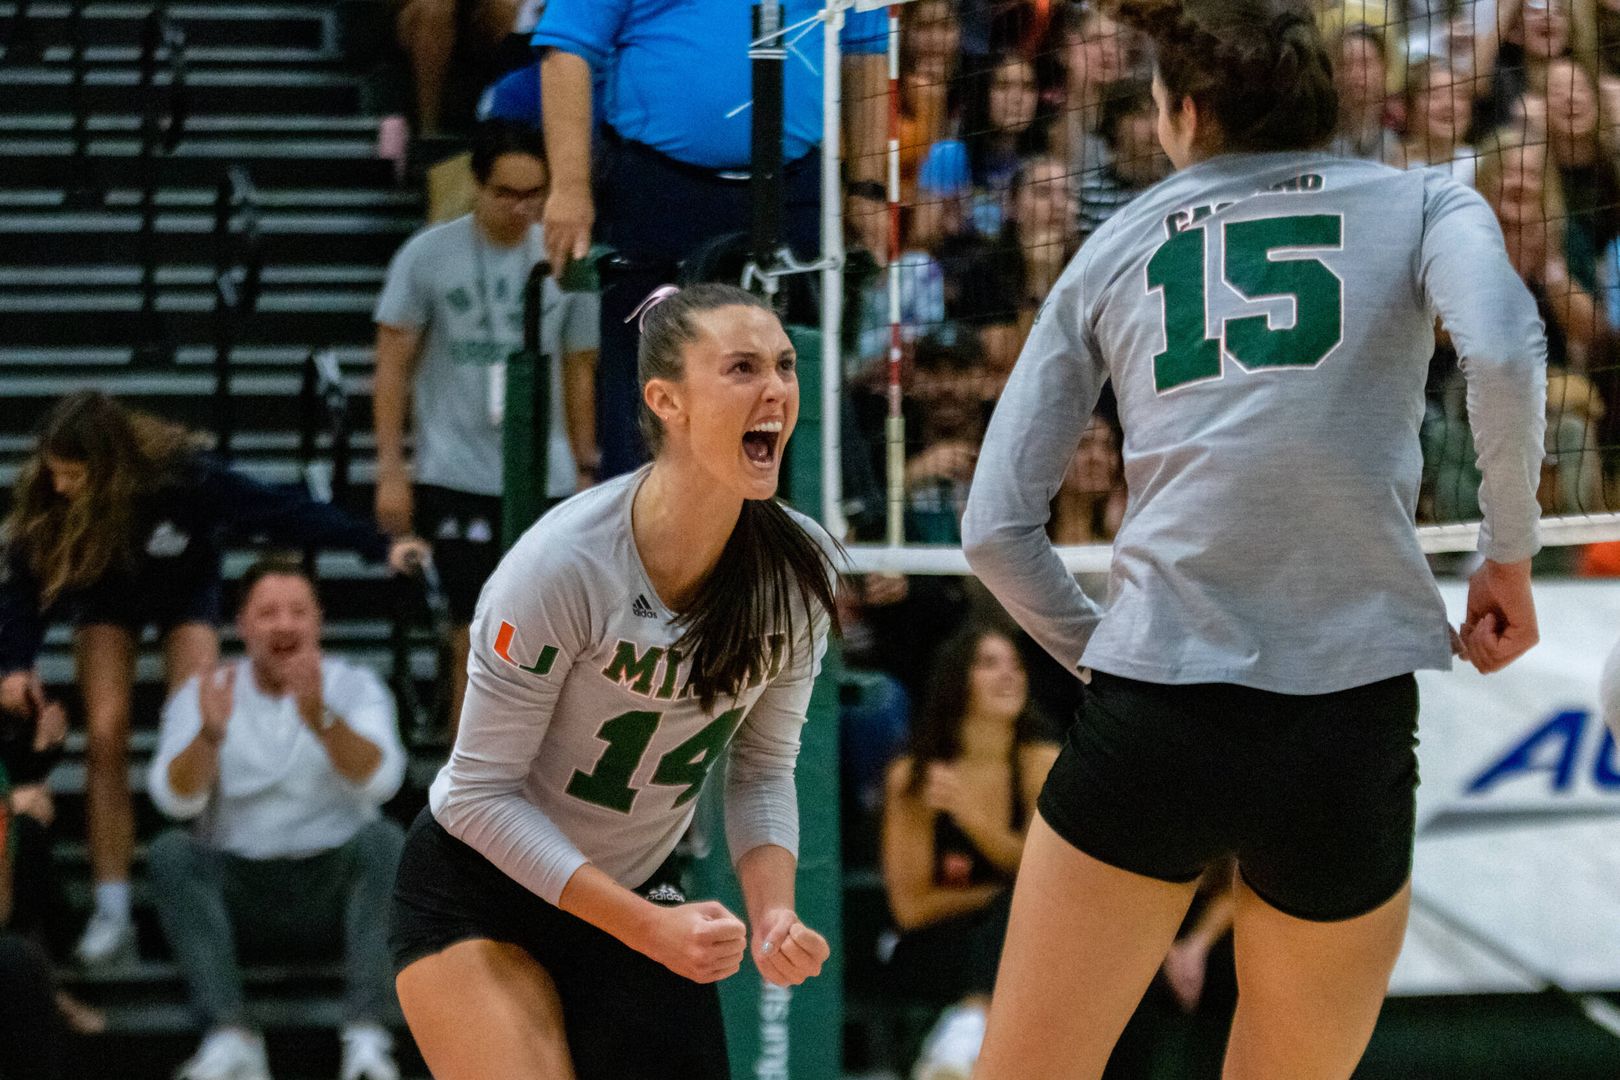 Canes Sweep Wake Forest, 3-0